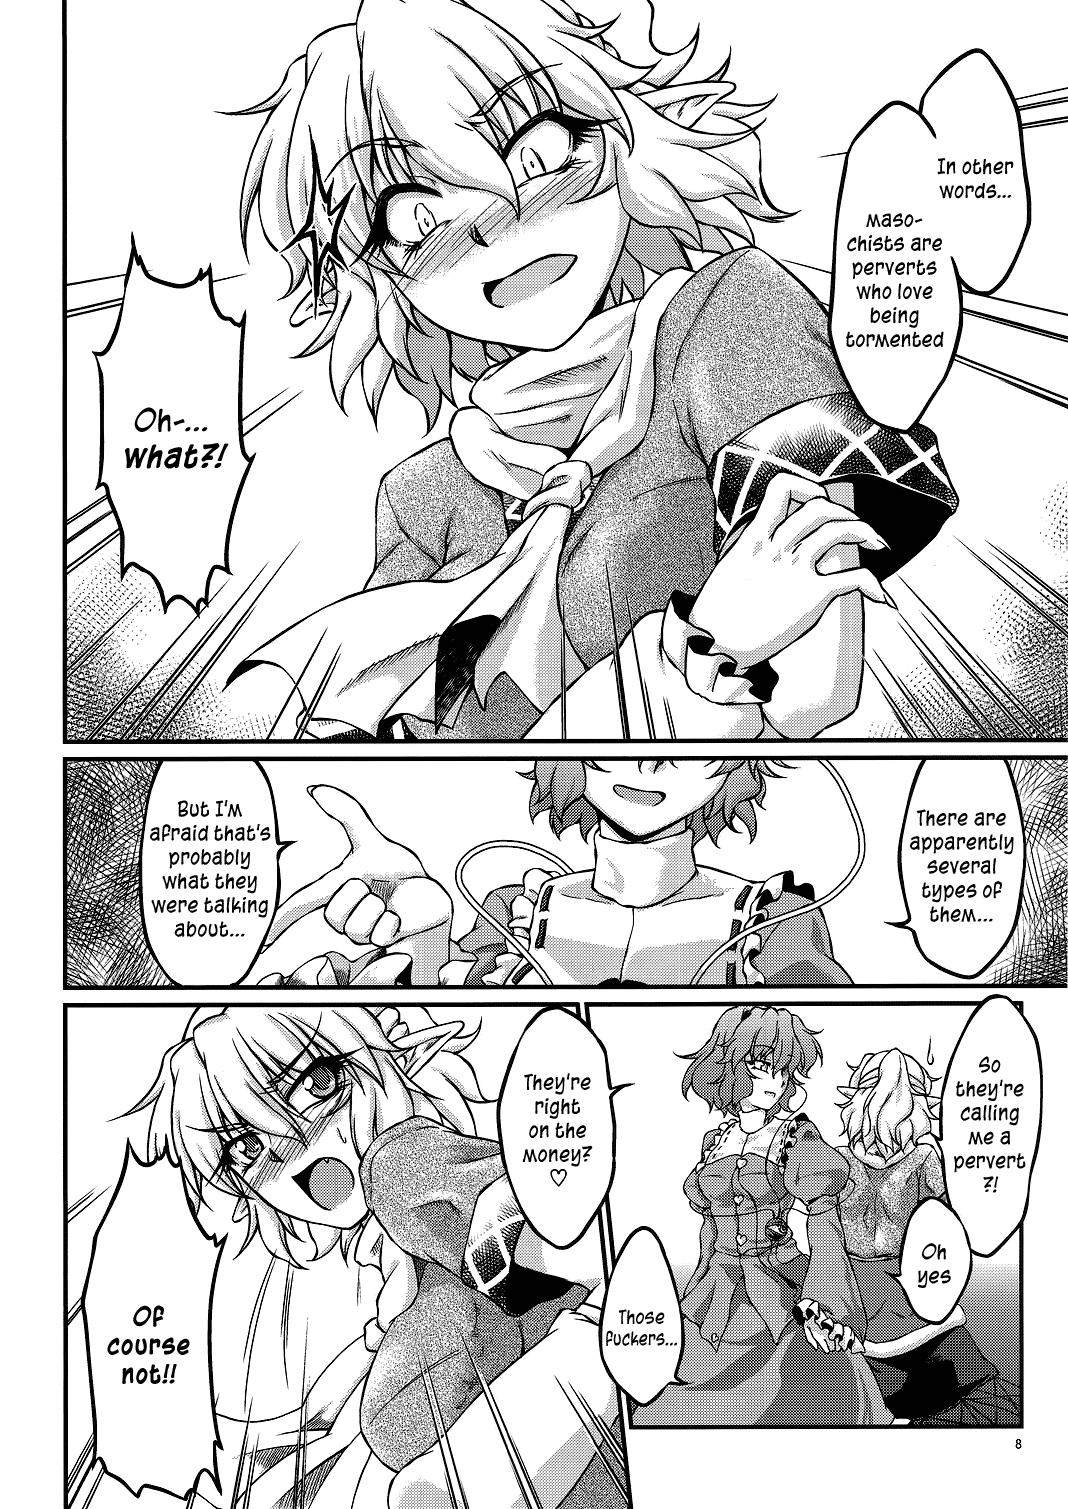 Rebolando Say the Word - Touhou project Nasty Free Porn - Page 7